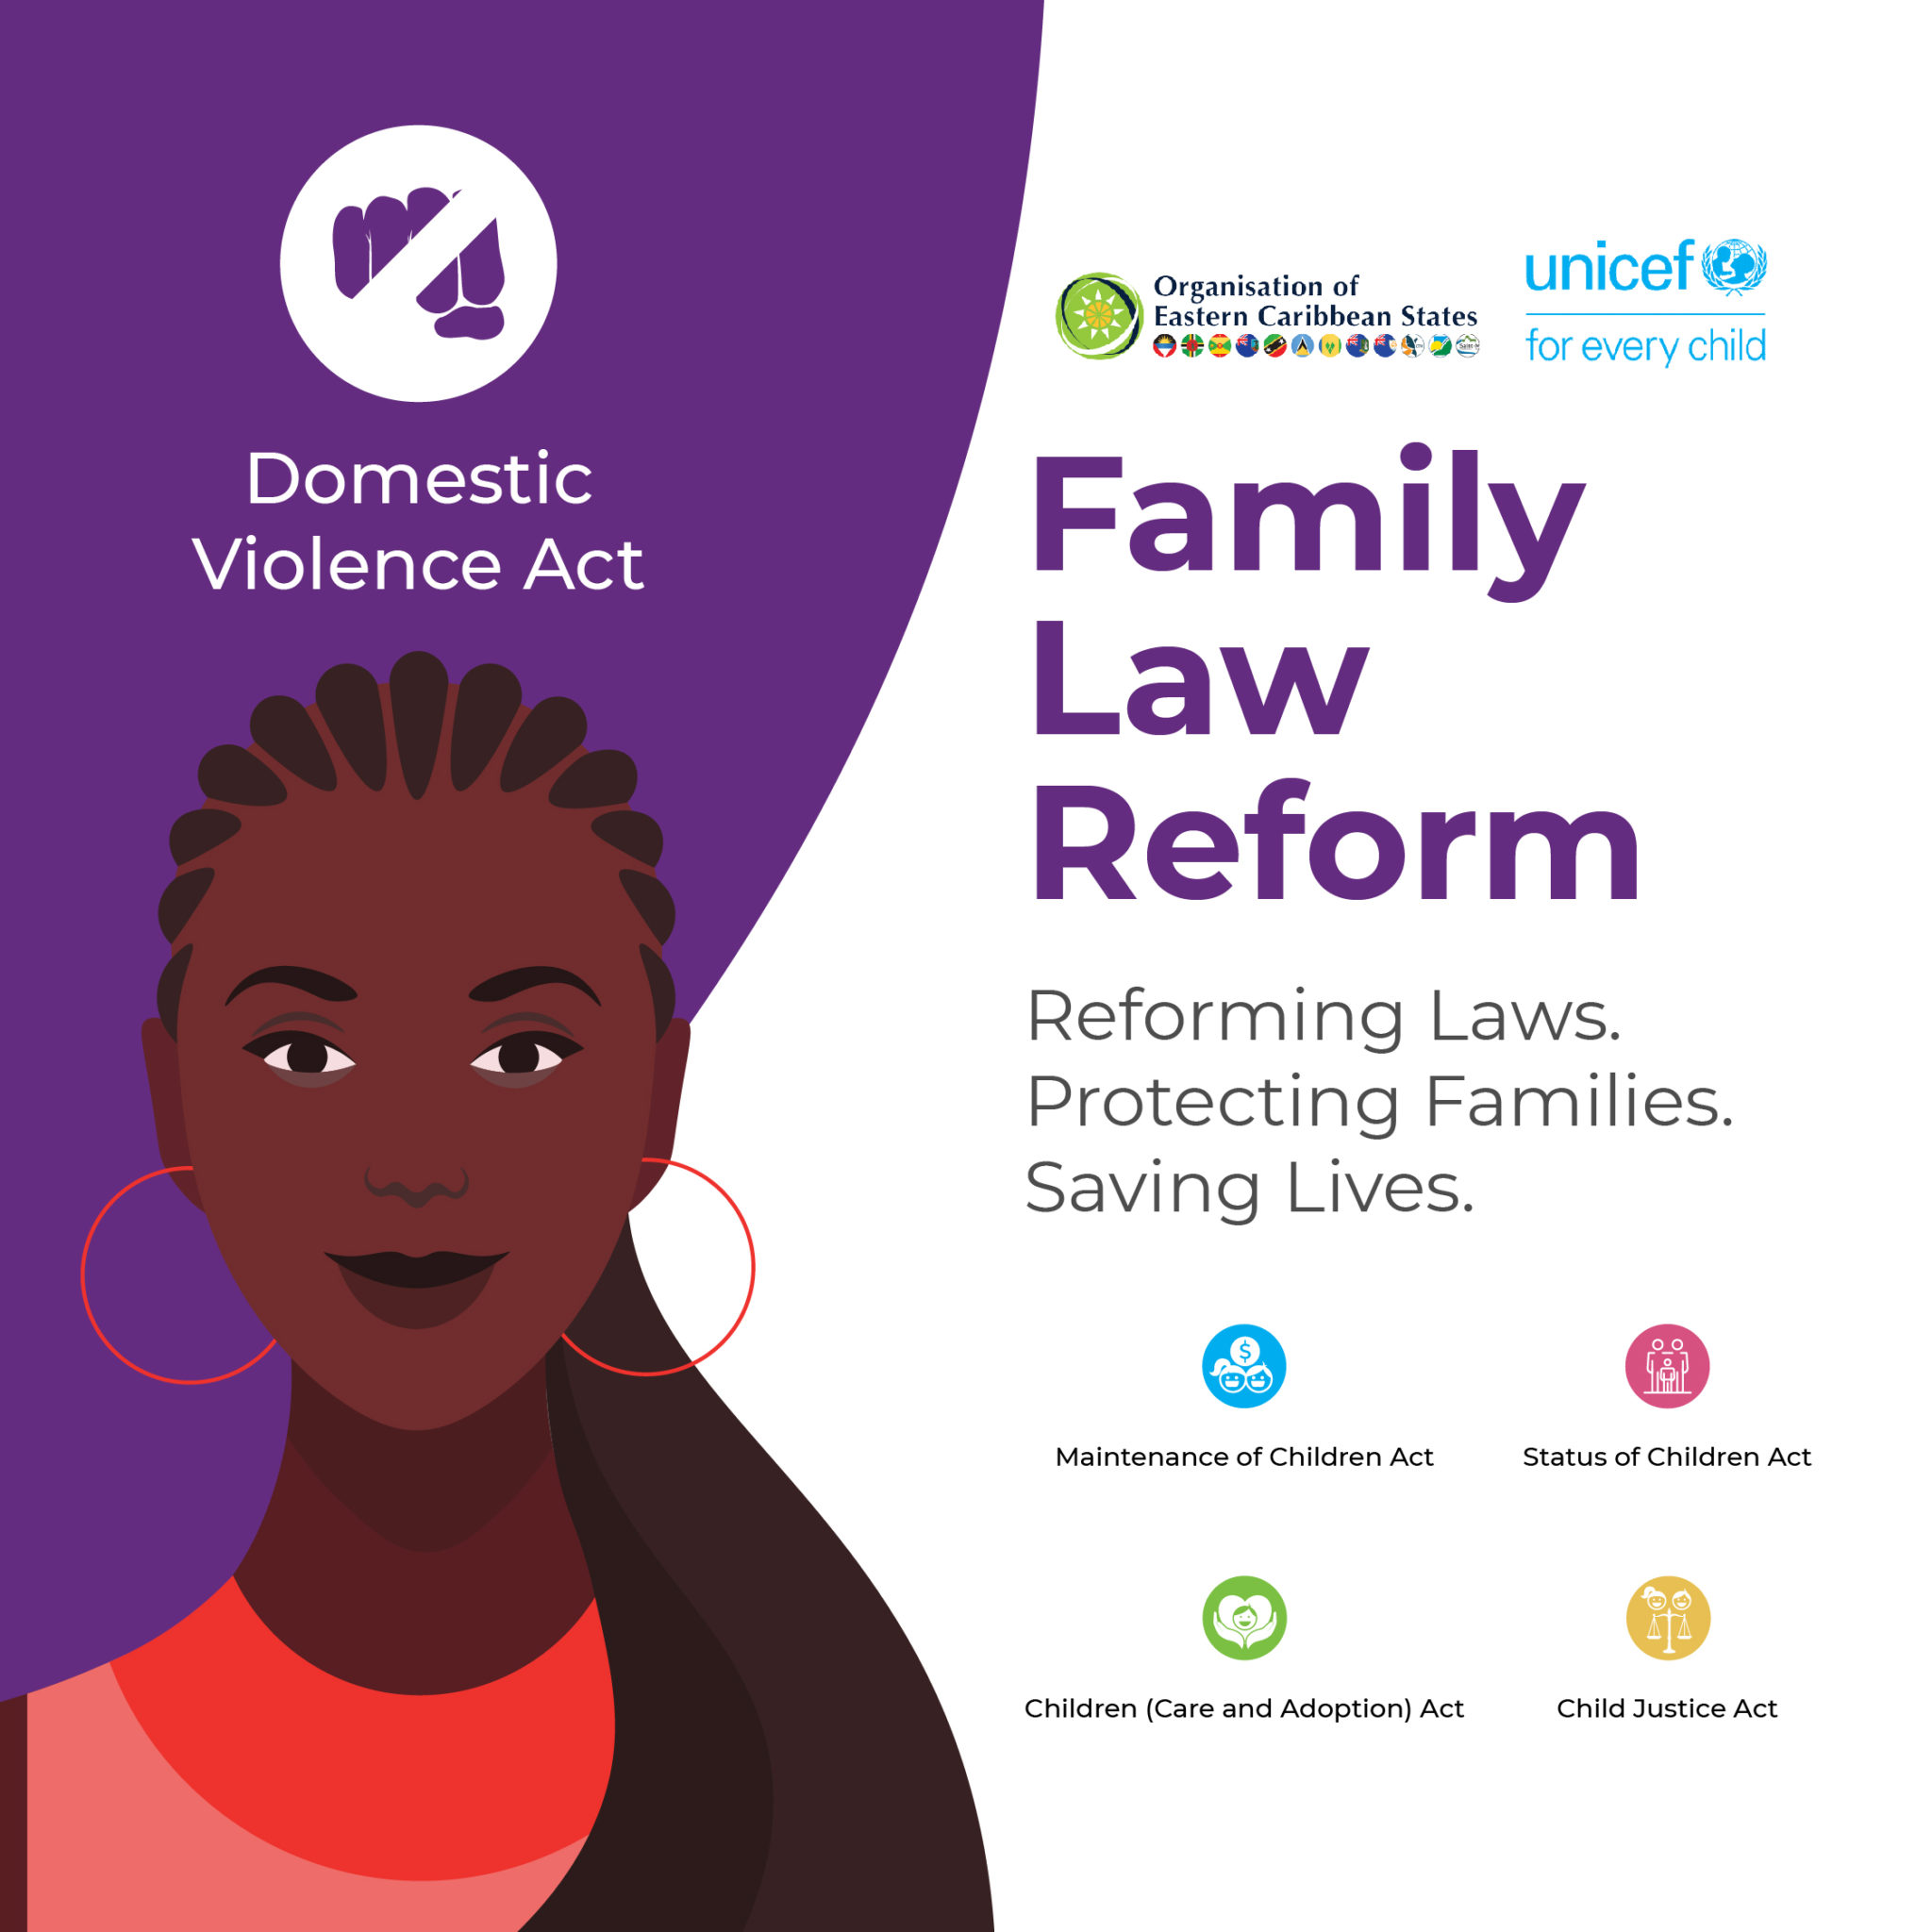  The rights of women, children and families in the OECS will be better protected following the recent implementation of the OECS Family Law Reform Bills.